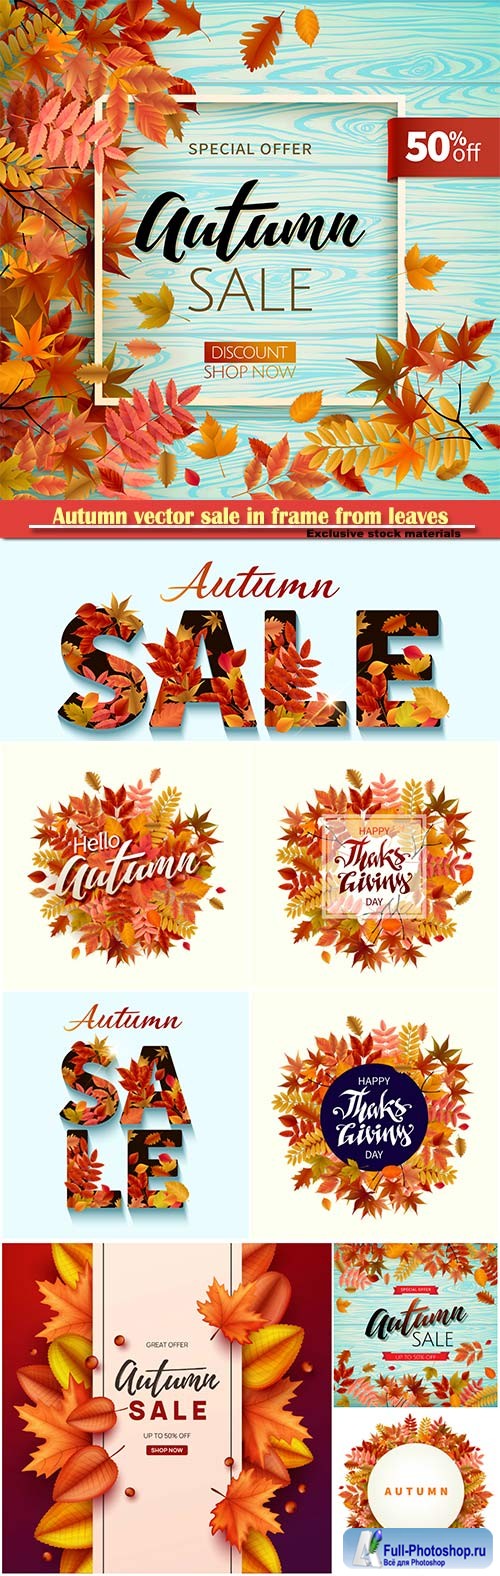 Autumn vector sale in frame from leaves